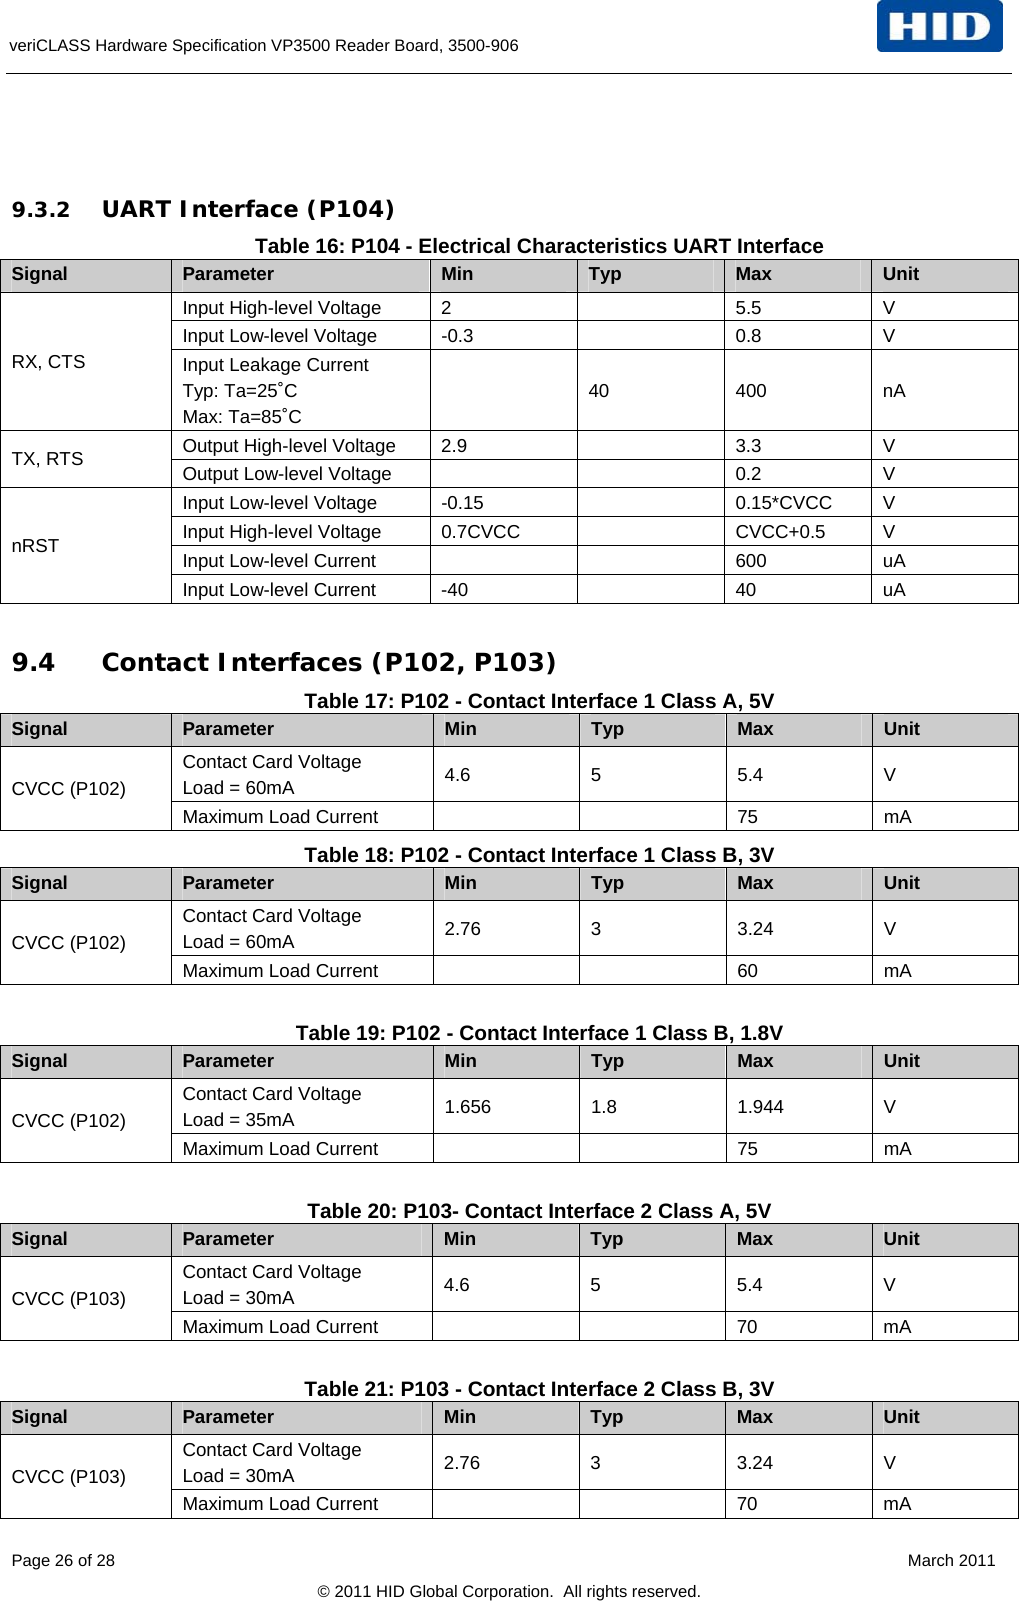  veriCLASS Hardware Specification VP3500 Reader Board, 3500-906    9.3.2 UART Interface (P104) Table 16: P104 - Electrical Characteristics UART Interface Signal  Parameter  Min  Typ  Max  Unit Input High-level Voltage  2    5.5  V Input Low-level Voltage  -0.3    0.8  V RX, CTS  Input Leakage Current Typ: Ta=25˚C Max: Ta=85˚C  40 400 nA Output High-level Voltage  2.9    3.3  V TX, RTS  Output Low-level Voltage      0.2  V Input Low-level Voltage  -0.15    0.15*CVCC  V Input High-level Voltage 0.7CVCC    CVCC+0.5 V Input Low-level Current      600  uA nRST Input Low-level Current  -40    40  uA  9.4 Contact Interfaces (P102, P103) Table 17: P102 - Contact Interface 1 Class A, 5V Signal  Parameter  Min  Typ  Max  Unit Contact Card Voltage  Load = 60mA  4.6 5  5.4 V CVCC (P102) Maximum Load Current      75  mA Table 18: P102 - Contact Interface 1 Class B, 3V Signal  Parameter  Min  Typ  Max  Unit Contact Card Voltage  Load = 60mA  2.76 3  3.24 V CVCC (P102) Maximum Load Current      60  mA  Table 19: P102 - Contact Interface 1 Class B, 1.8V Signal  Parameter  Min  Typ  Max  Unit Contact Card Voltage  Load = 35mA  1.656 1.8  1.944 V CVCC (P102) Maximum Load Current      75  mA  Table 20: P103- Contact Interface 2 Class A, 5V Signal  Parameter  Min  Typ  Max  Unit Contact Card Voltage  Load = 30mA  4.6 5  5.4 V CVCC (P103) Maximum Load Current      70  mA  Table 21: P103 - Contact Interface 2 Class B, 3V Signal  Parameter  Min  Typ  Max  Unit Contact Card Voltage  Load = 30mA  2.76 3  3.24 V CVCC (P103) Maximum Load Current      70  mA Page 26 of 28    March 2011 © 2011 HID Global Corporation.  All rights reserved. 